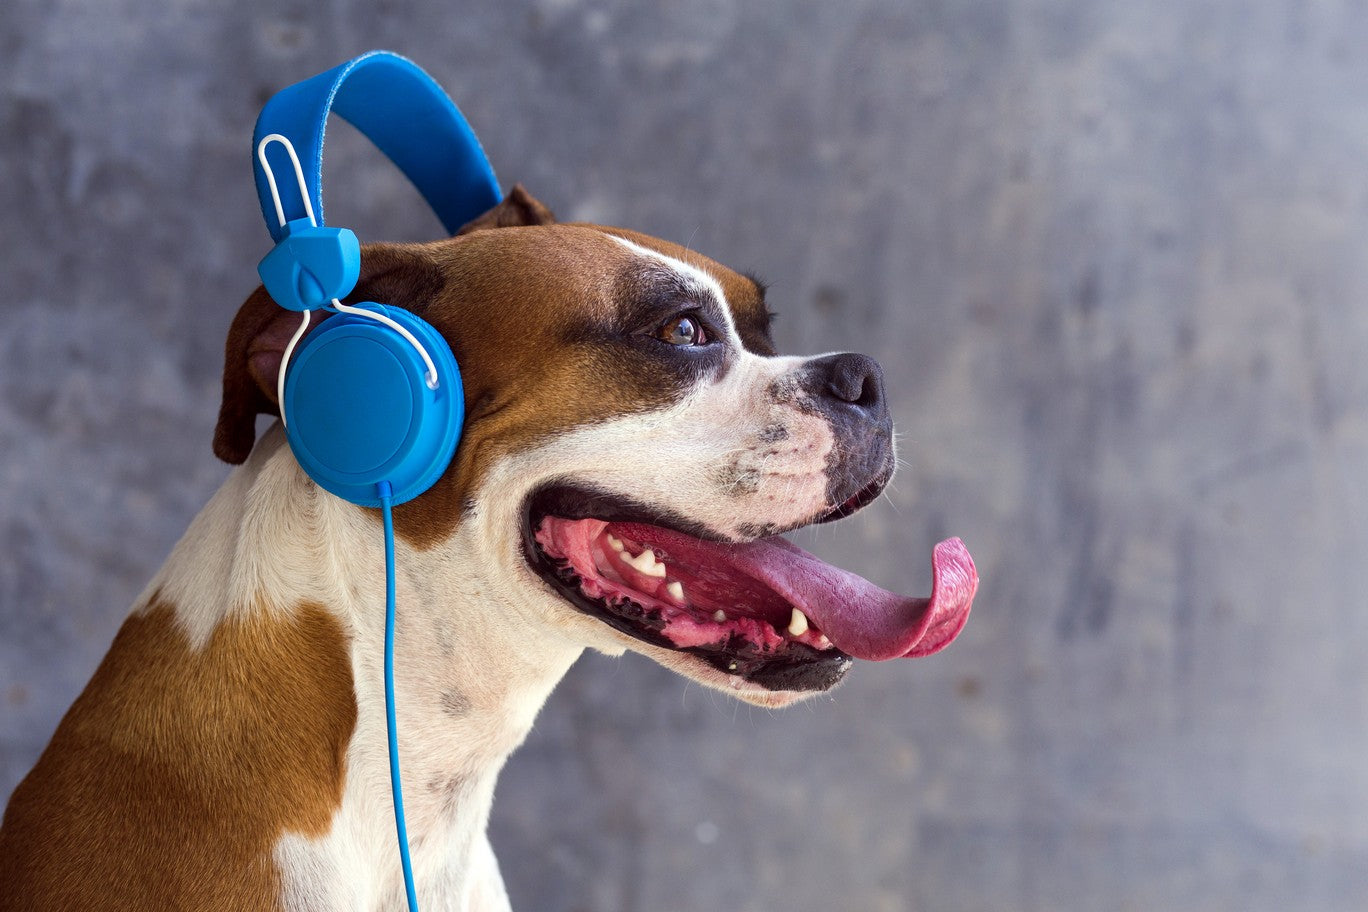 Does Dog Anxiety Music Work for Calming Dogs? – Bobby Bed